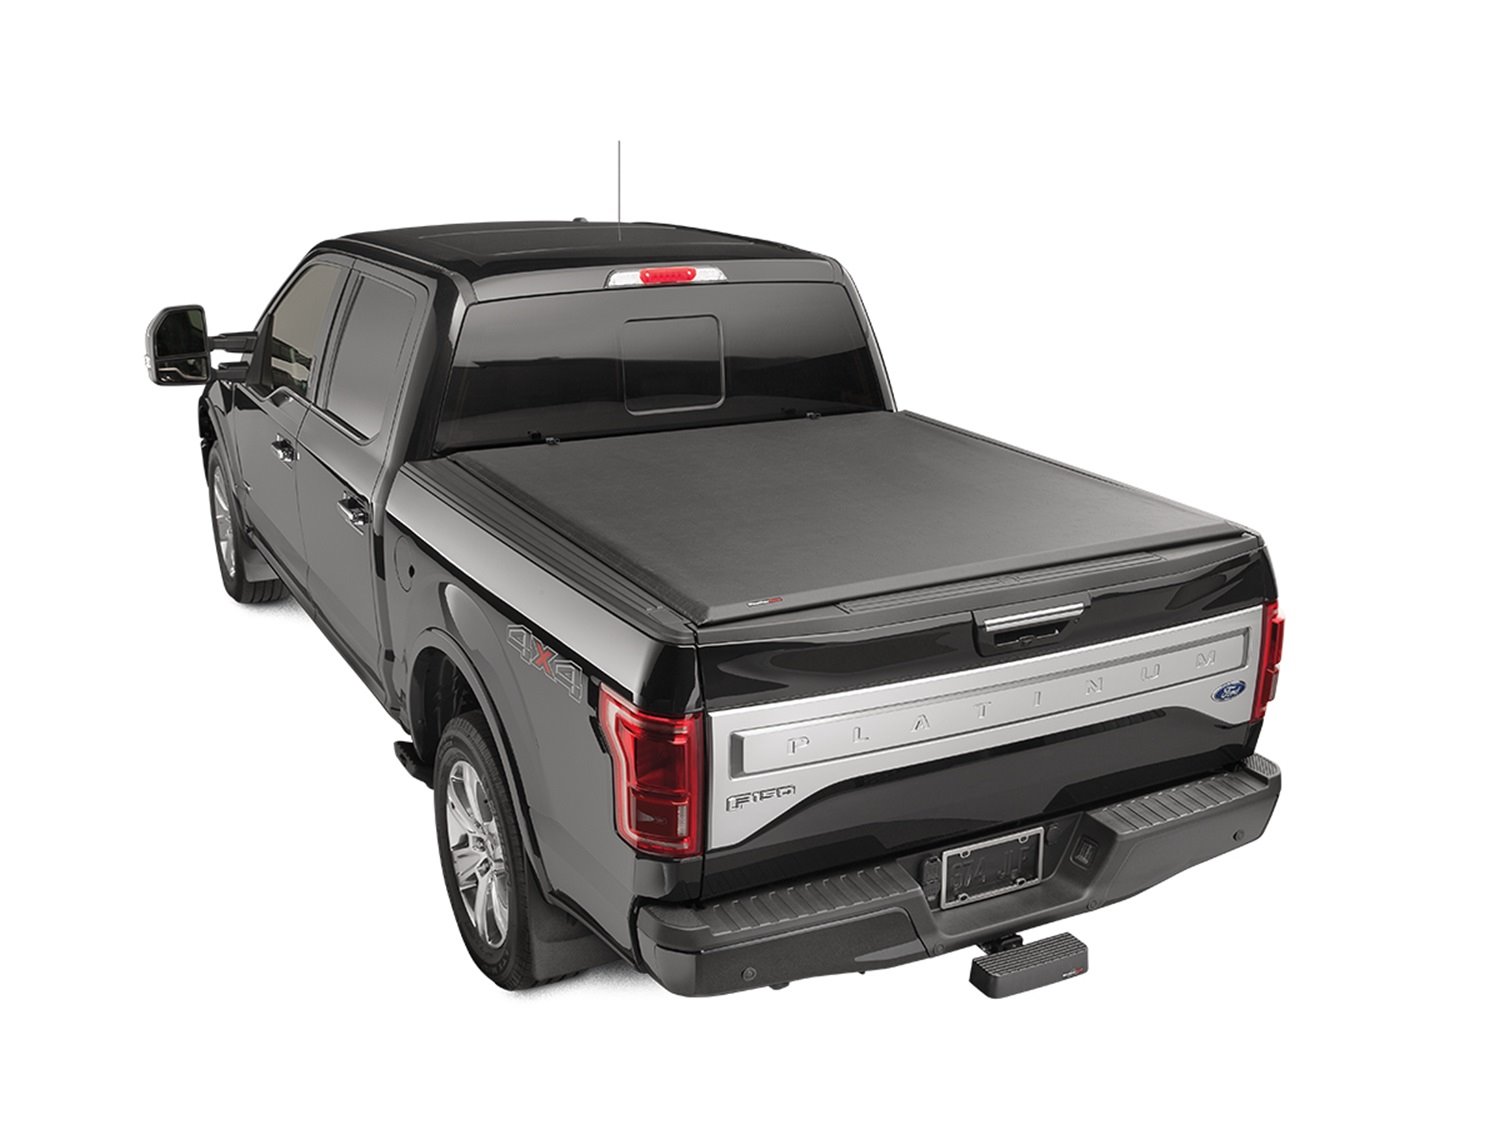 ROLL UP TRUCK BED COVER B TOYOTA TUNDRA 2007-2017 TUNDRA 5 6 BED W/ DECK RAIL